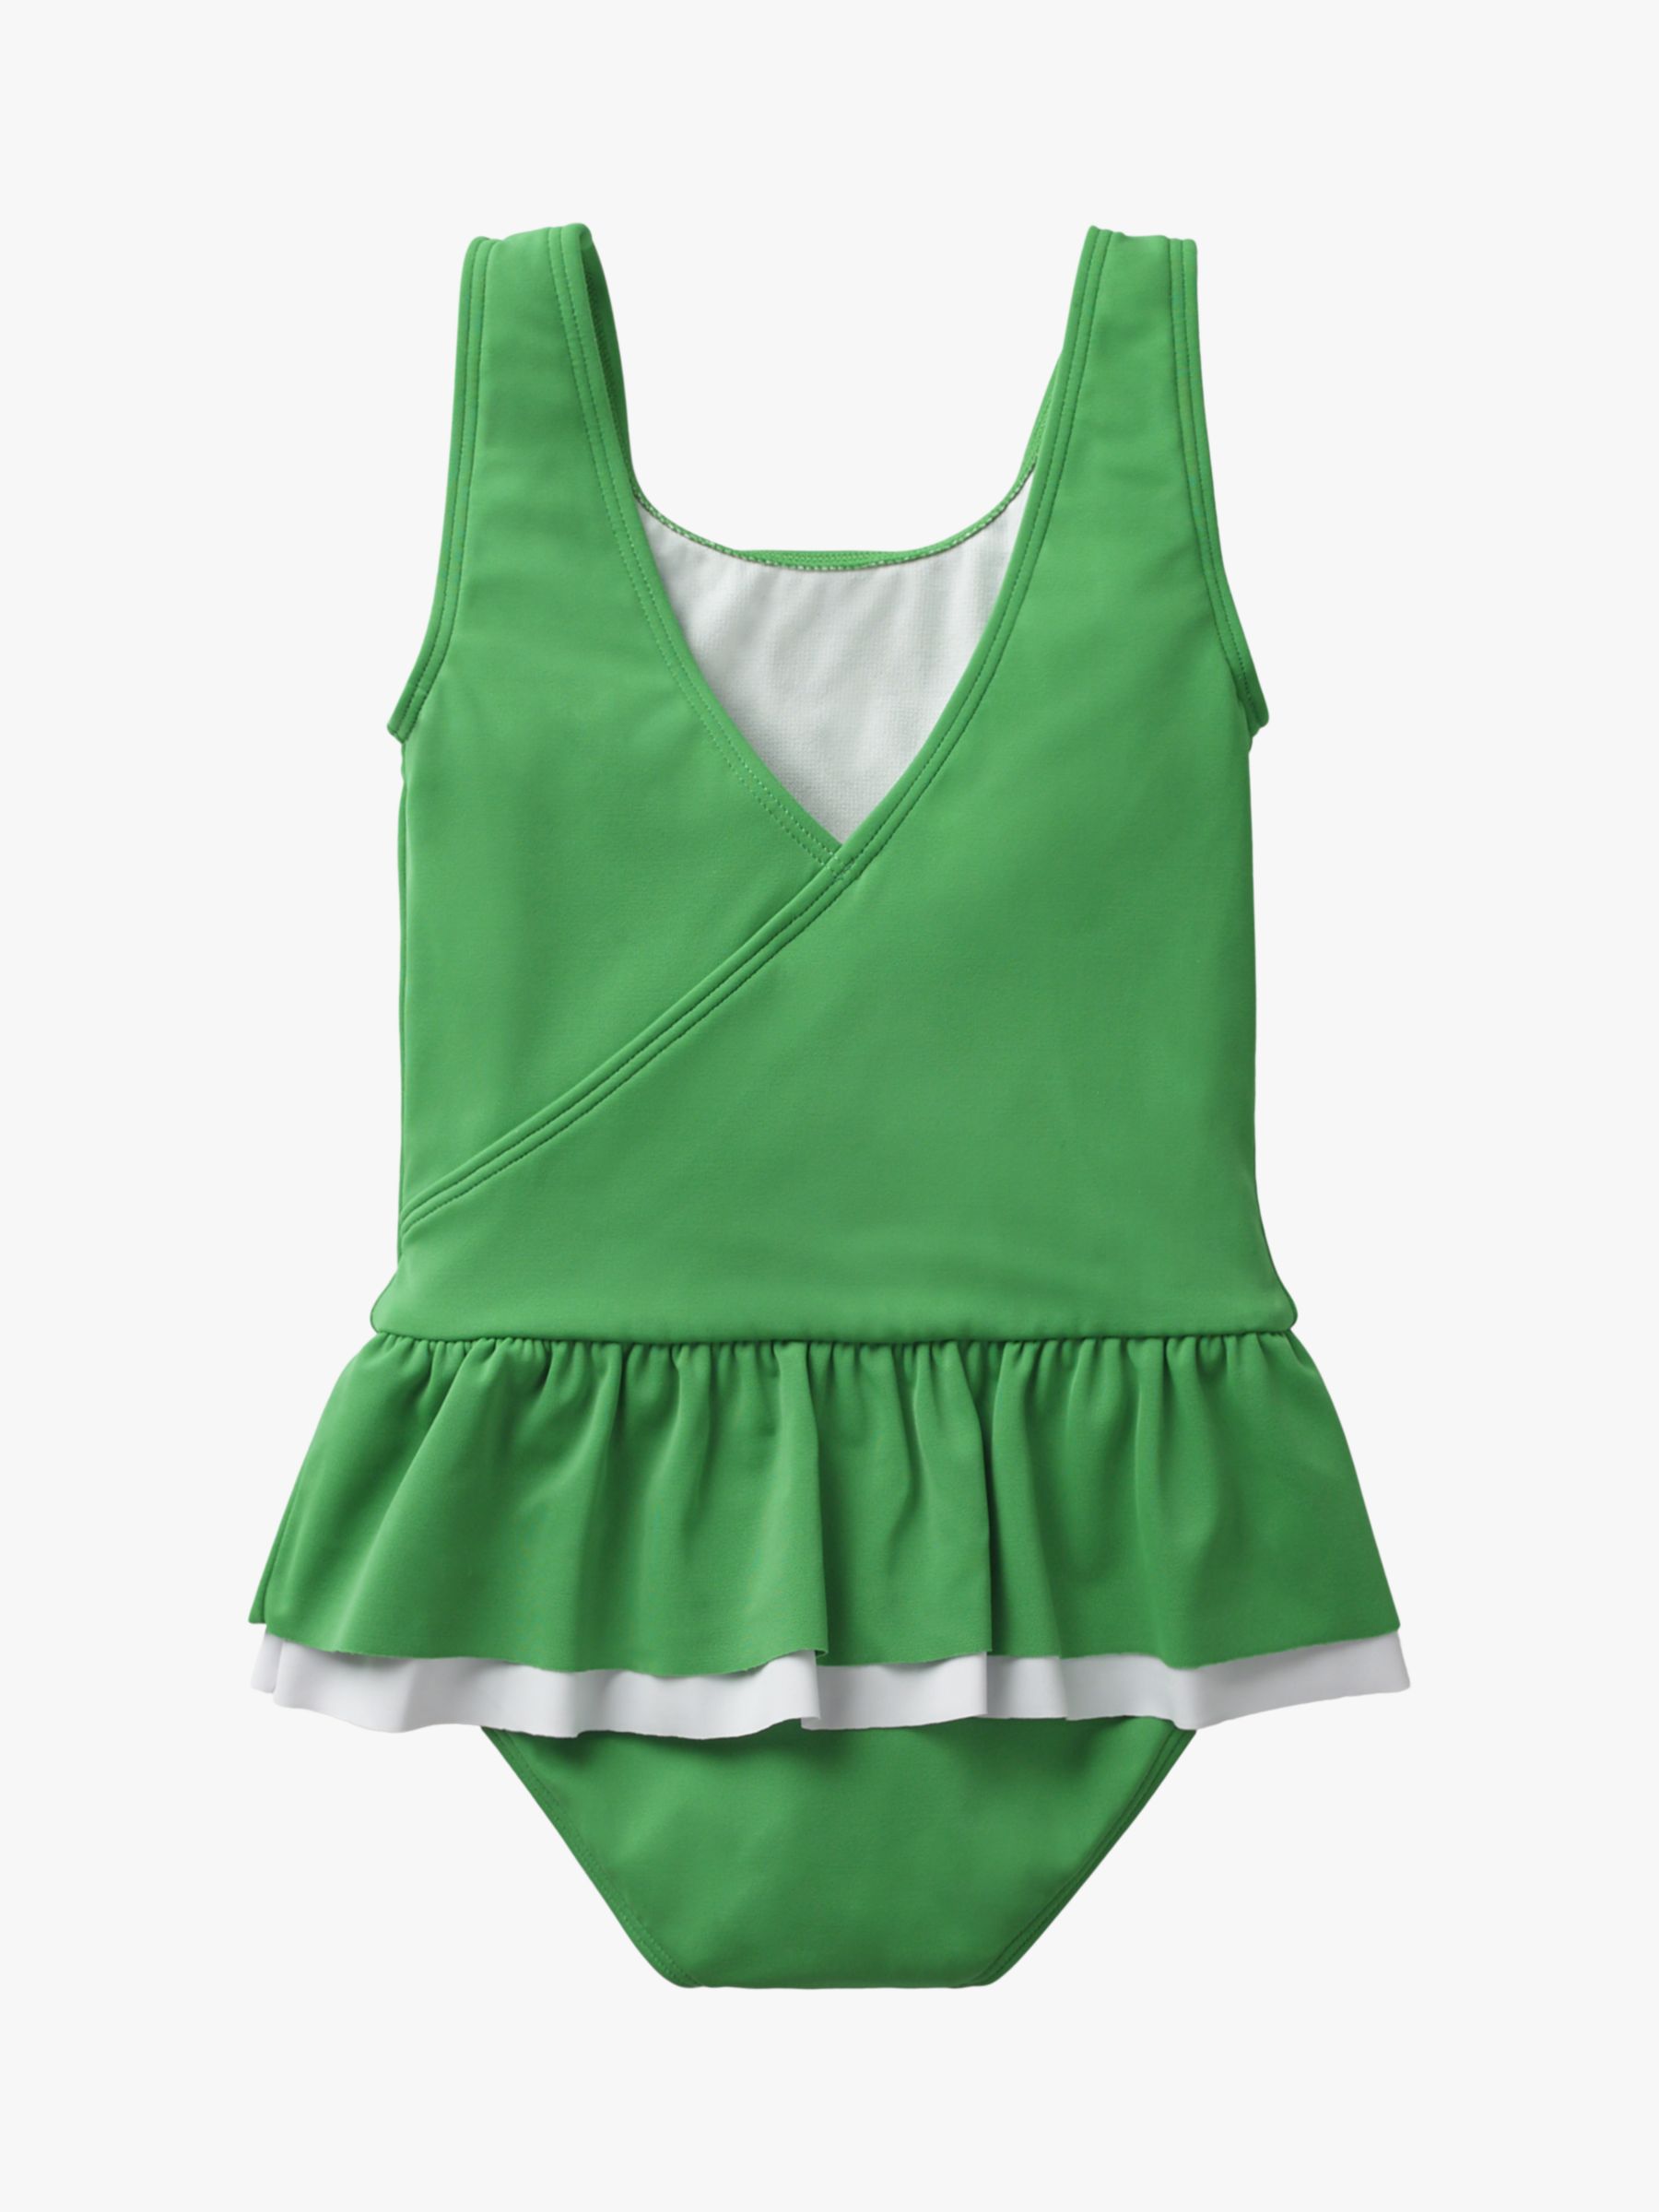 Mini Boden Girls Applique Flower Swimsuit Green At John Lewis And Partners